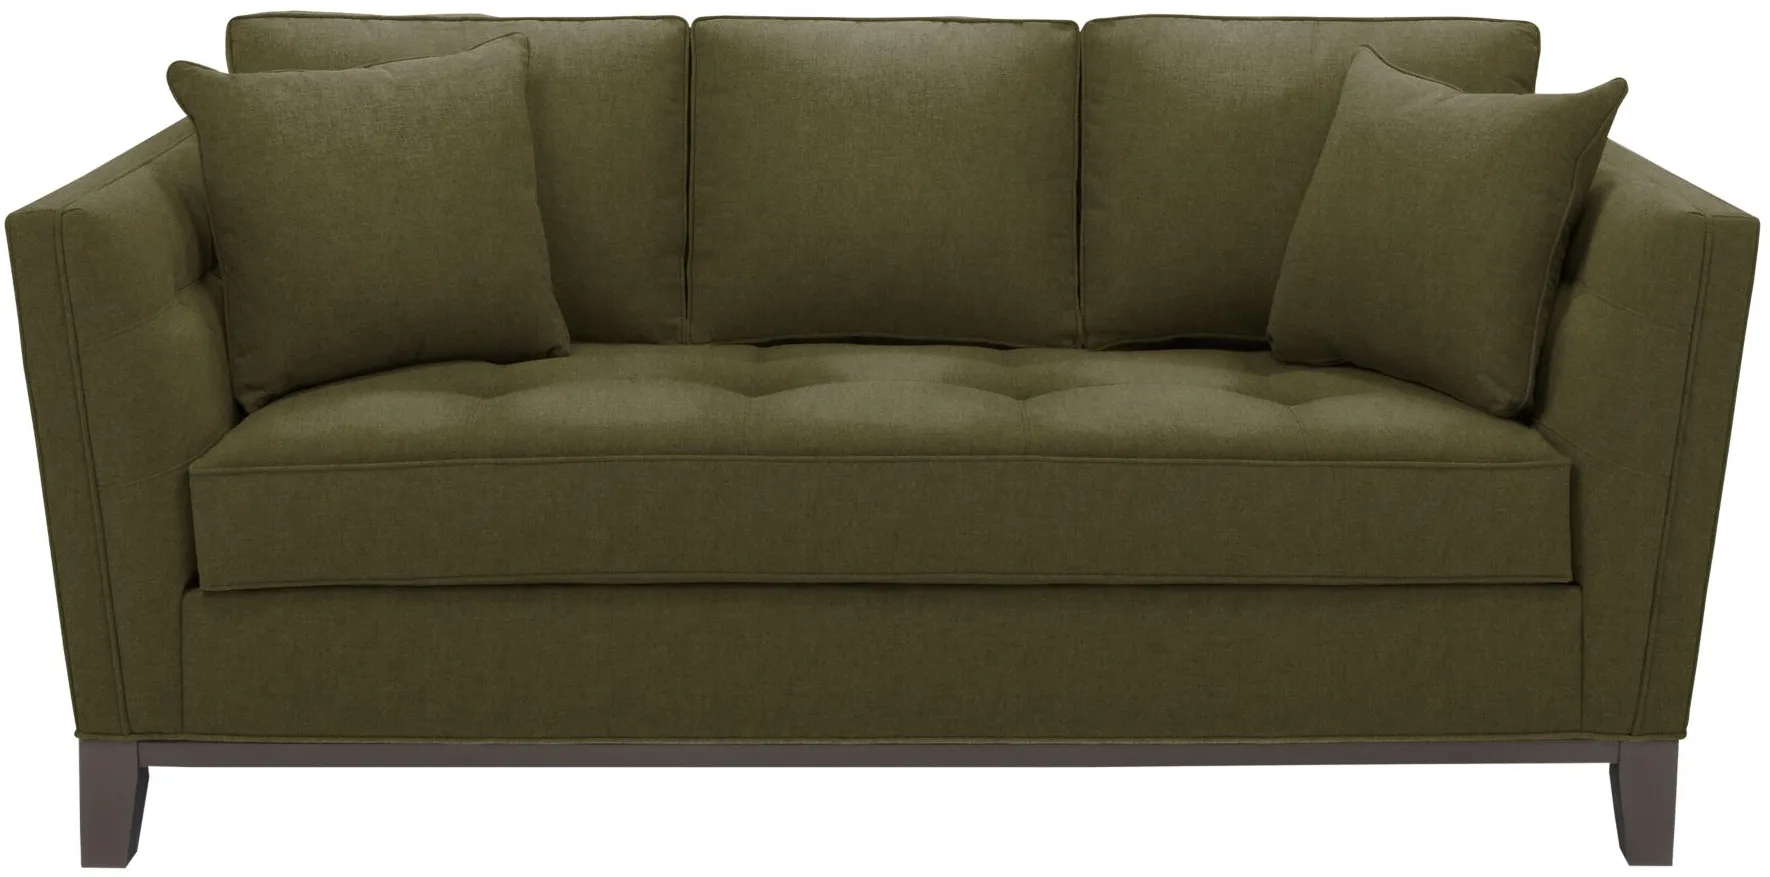 Macauley Apartment Sofa in Suede So Soft Pine by H.M. Richards